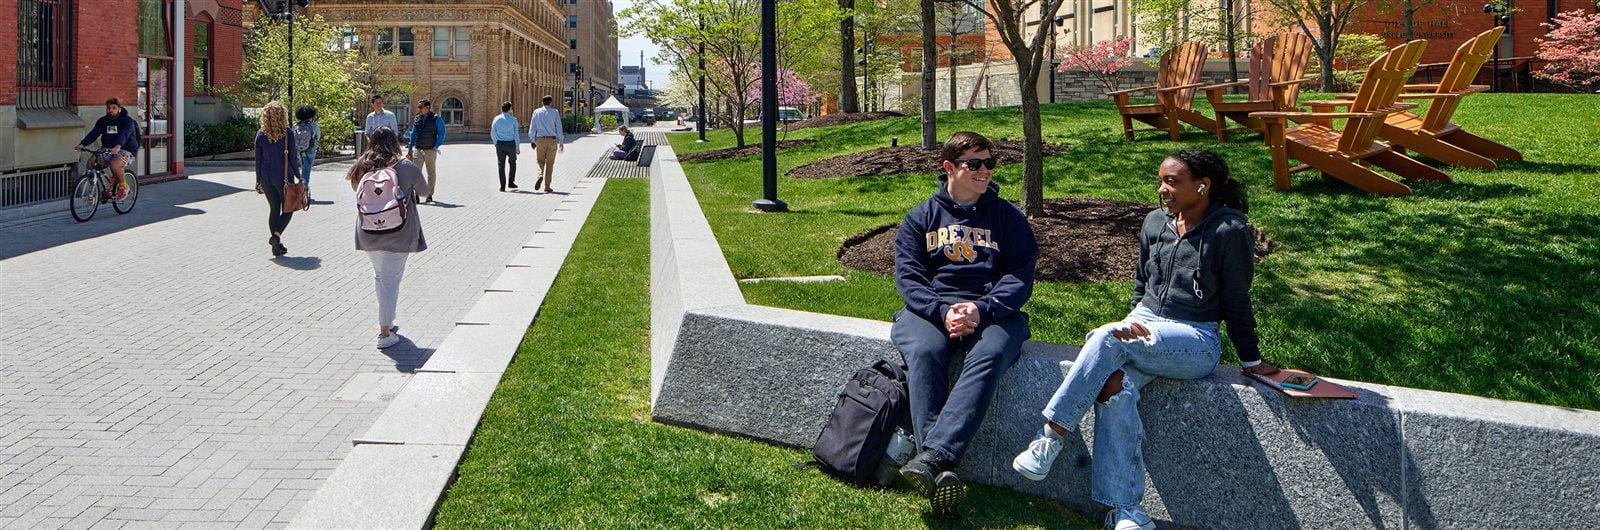 Two students sit chatting outside the Drexel Main Building on Perelman Plaza.